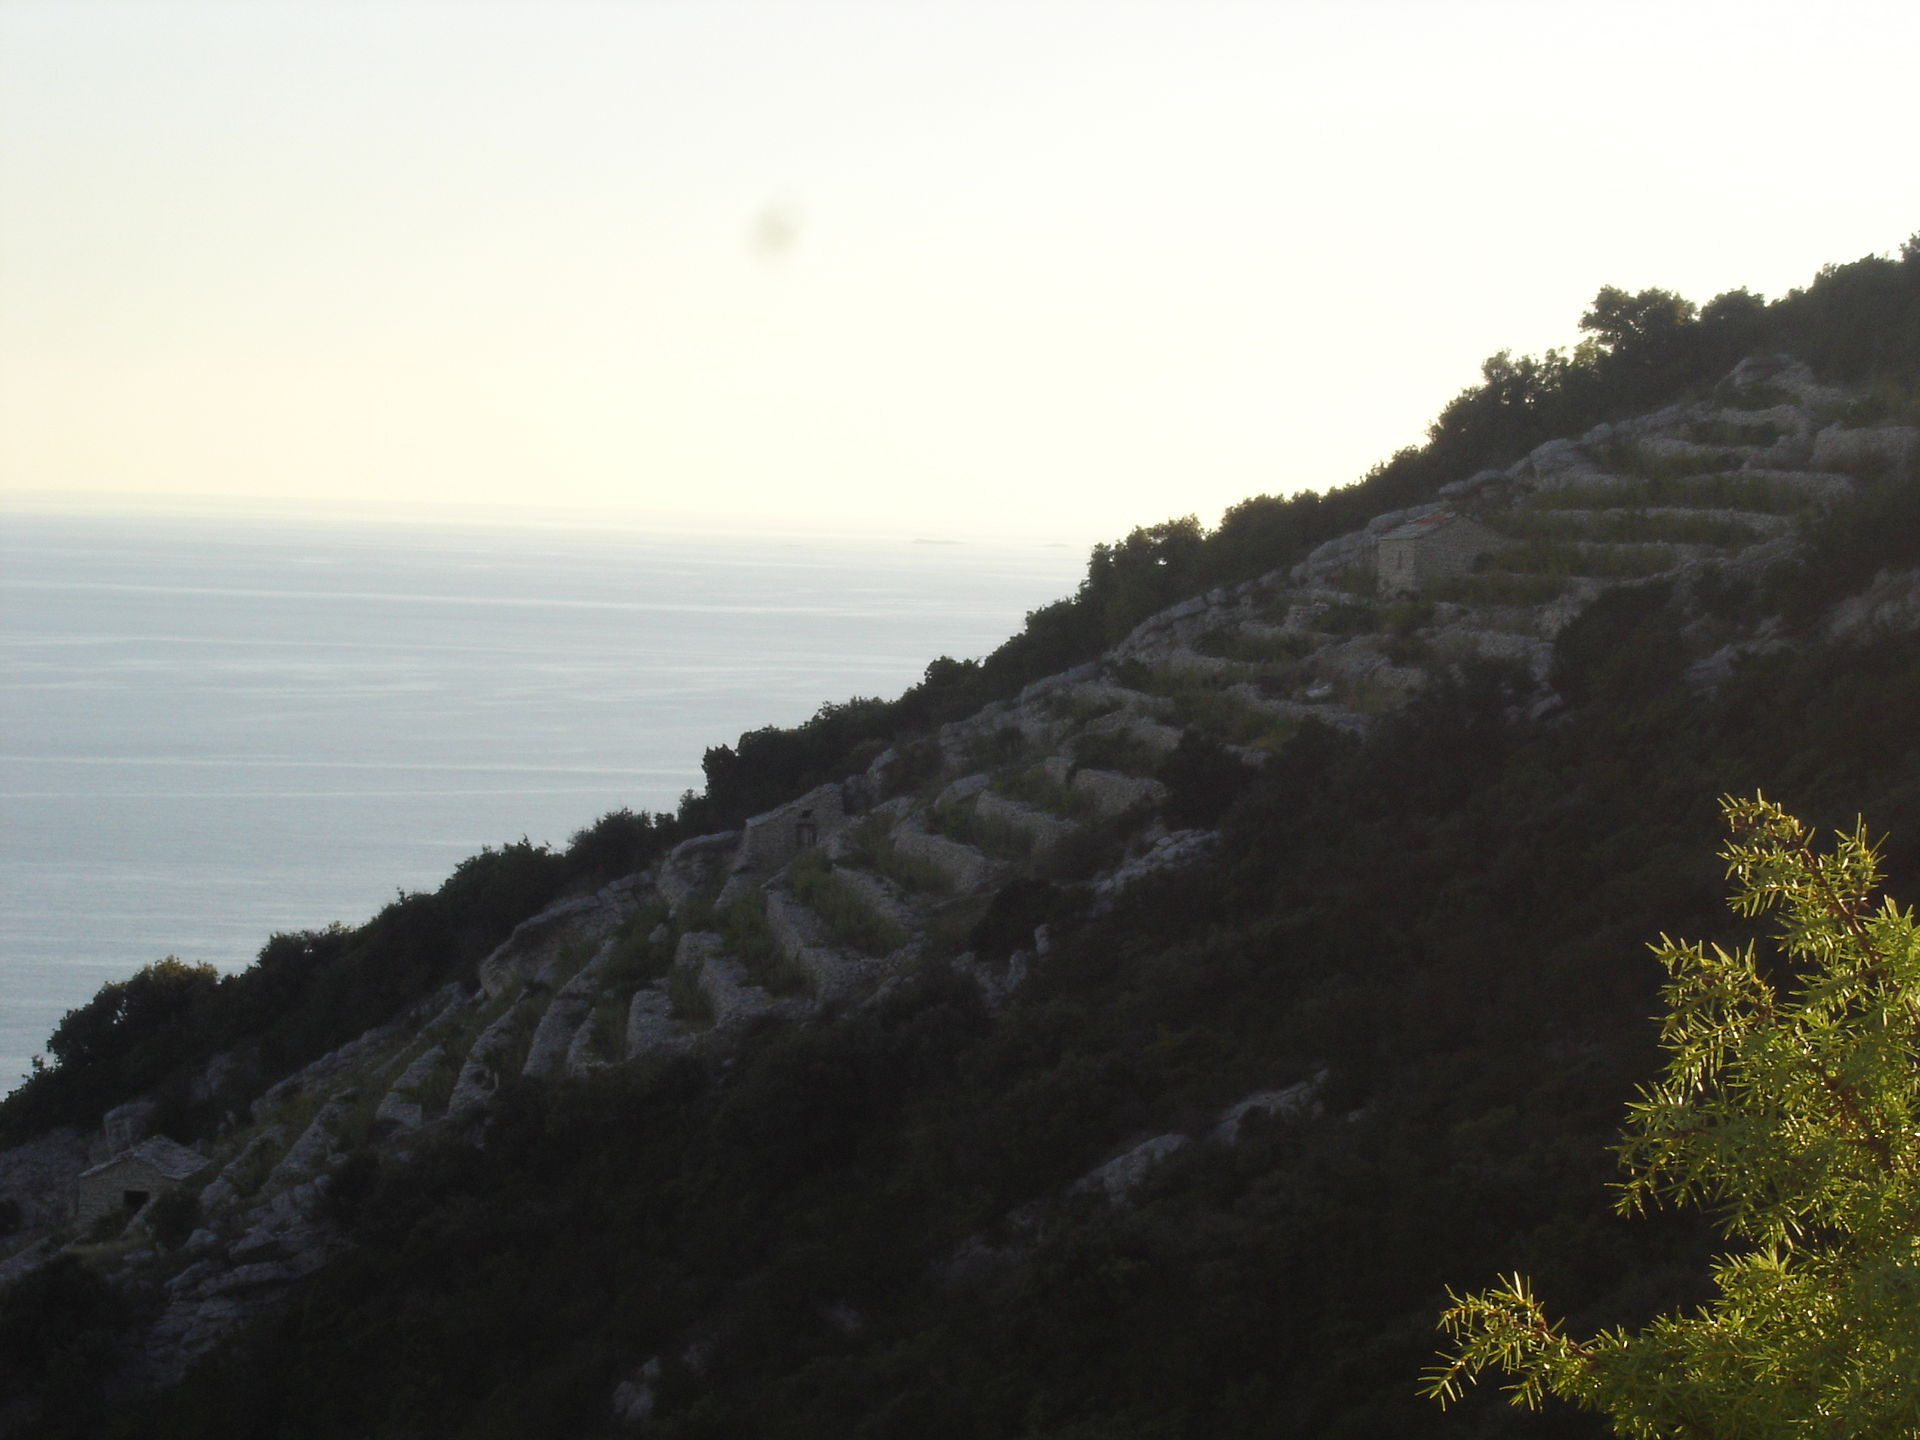 Korčula: 5 hiking routes designed with emphasis on the island’s wine and food specialties